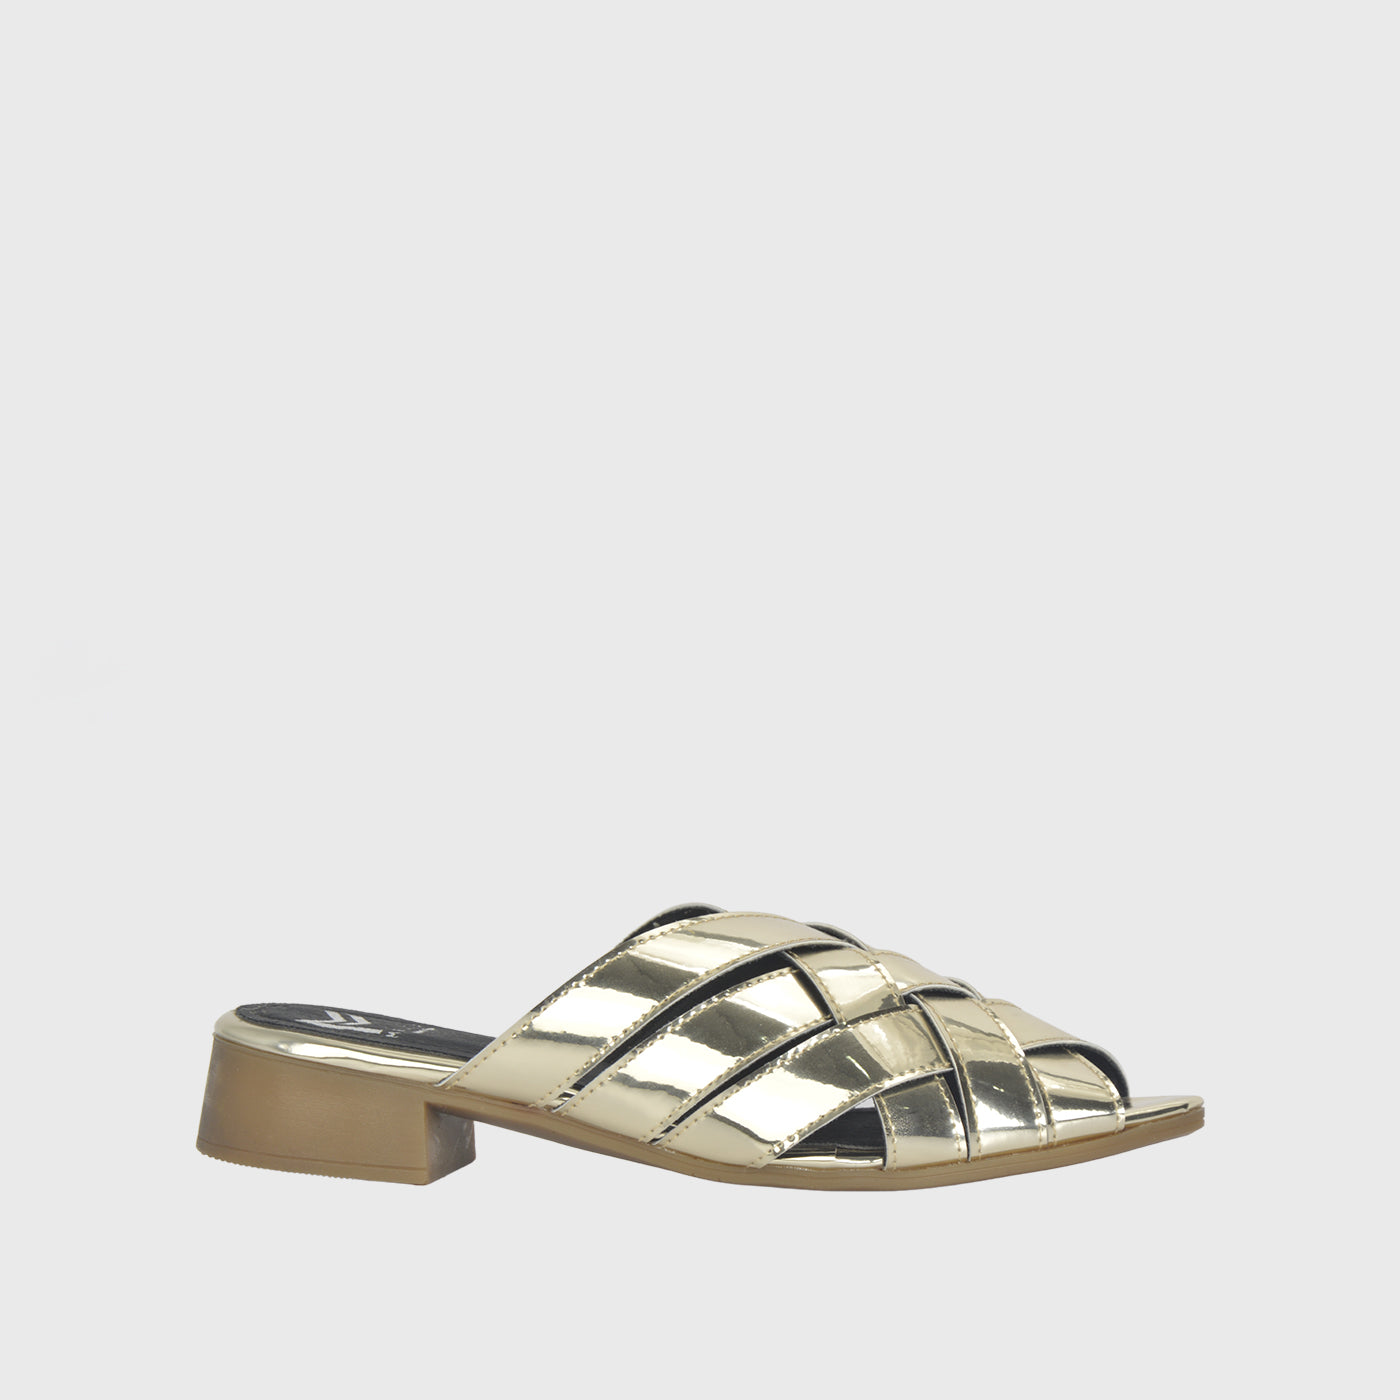 Gold Slipper Flat Shiny With Cross Straps